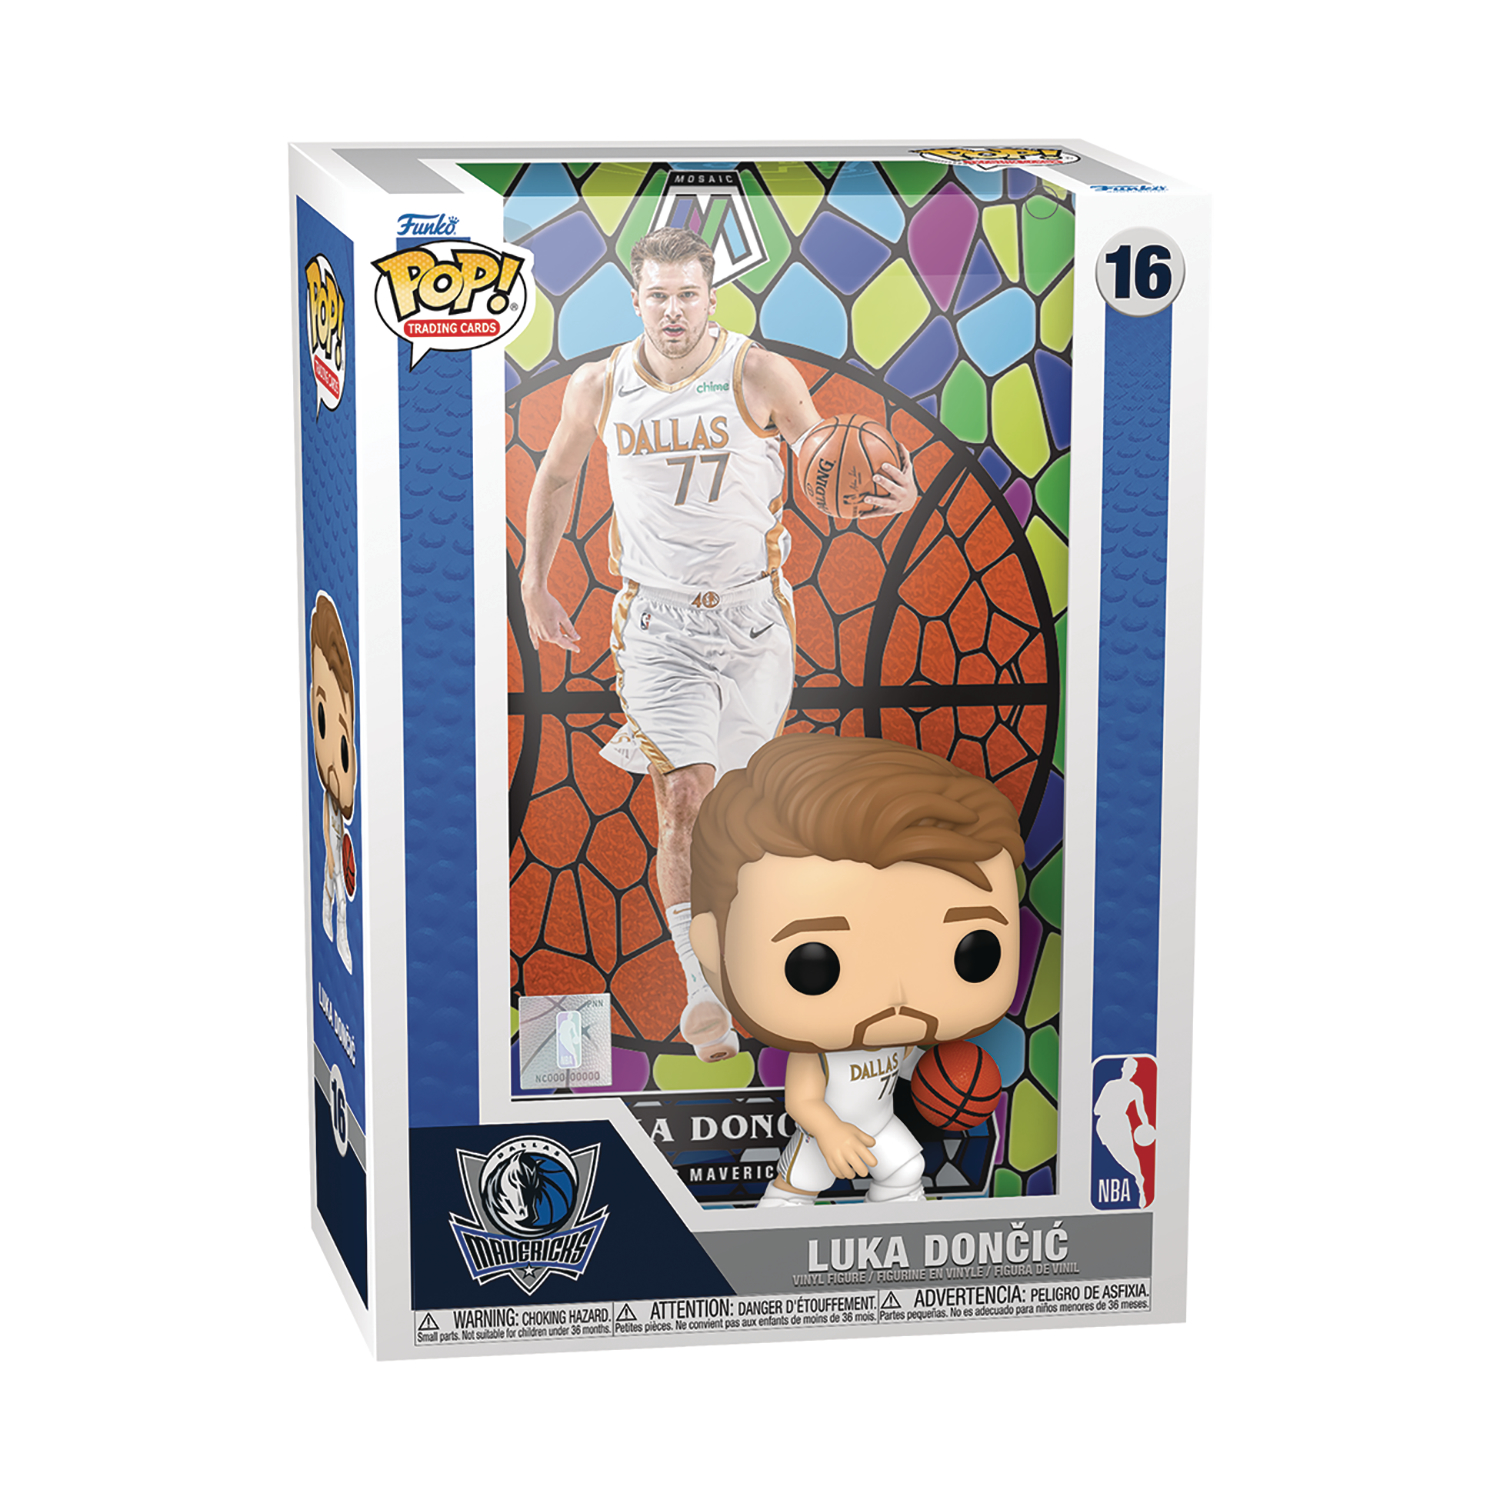 Pop Trading Cards Mosaic Luka Doncic